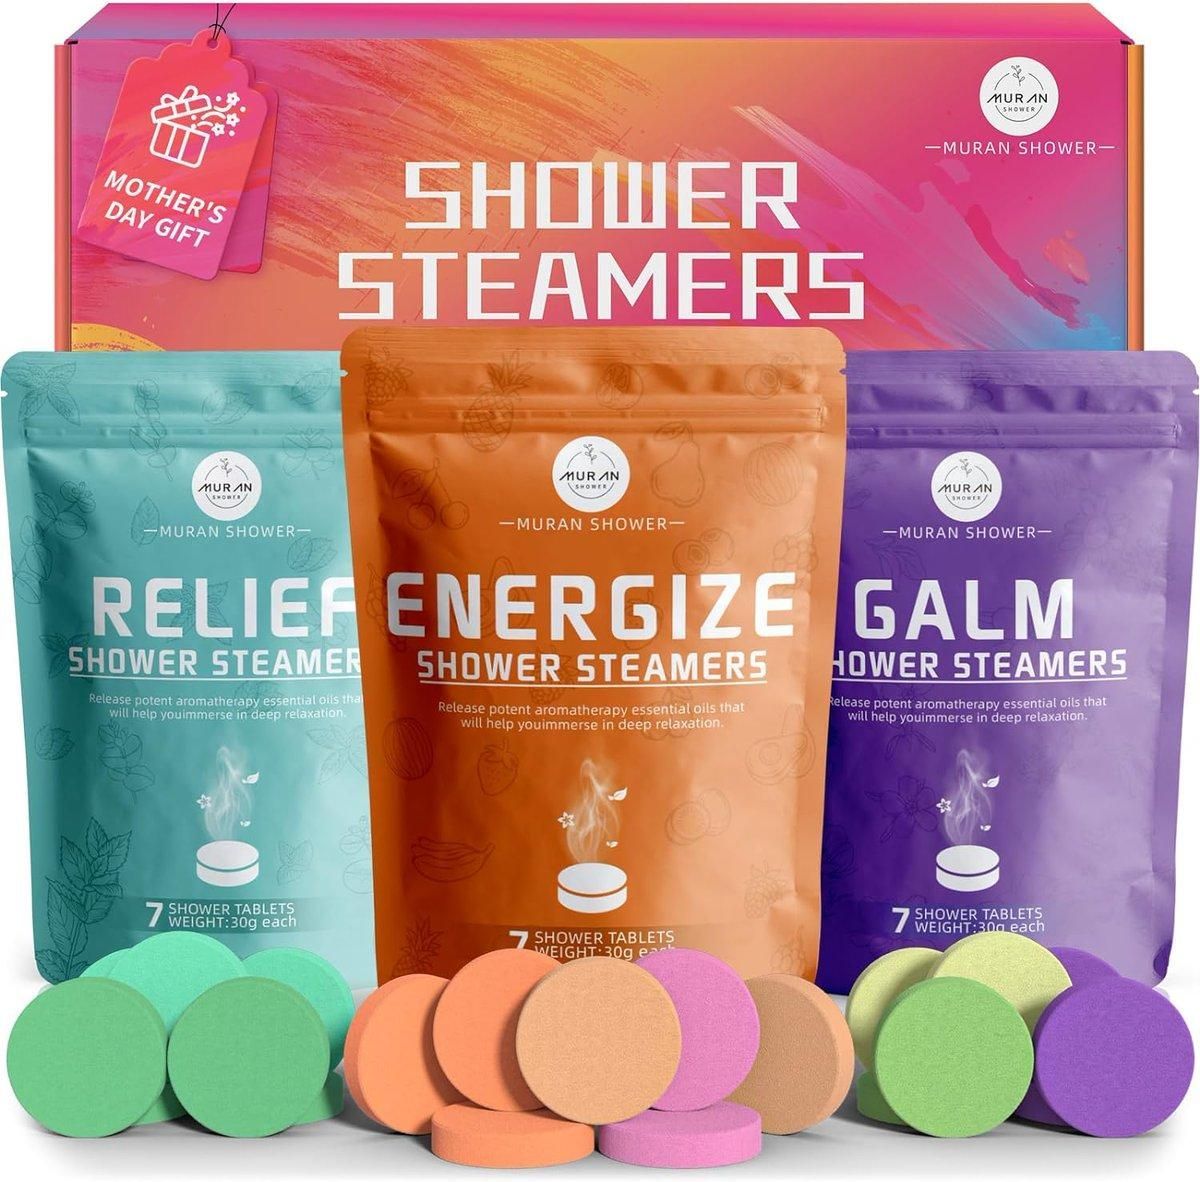 2x Stacking Steal!

21-Pack Aromatherapy Shower Steamers for $7.80, retail $26!

Coupon + Code 50XAQZ9P 

fkd.sale/?l=https://amz…

Post #Copped if you scored this deal!